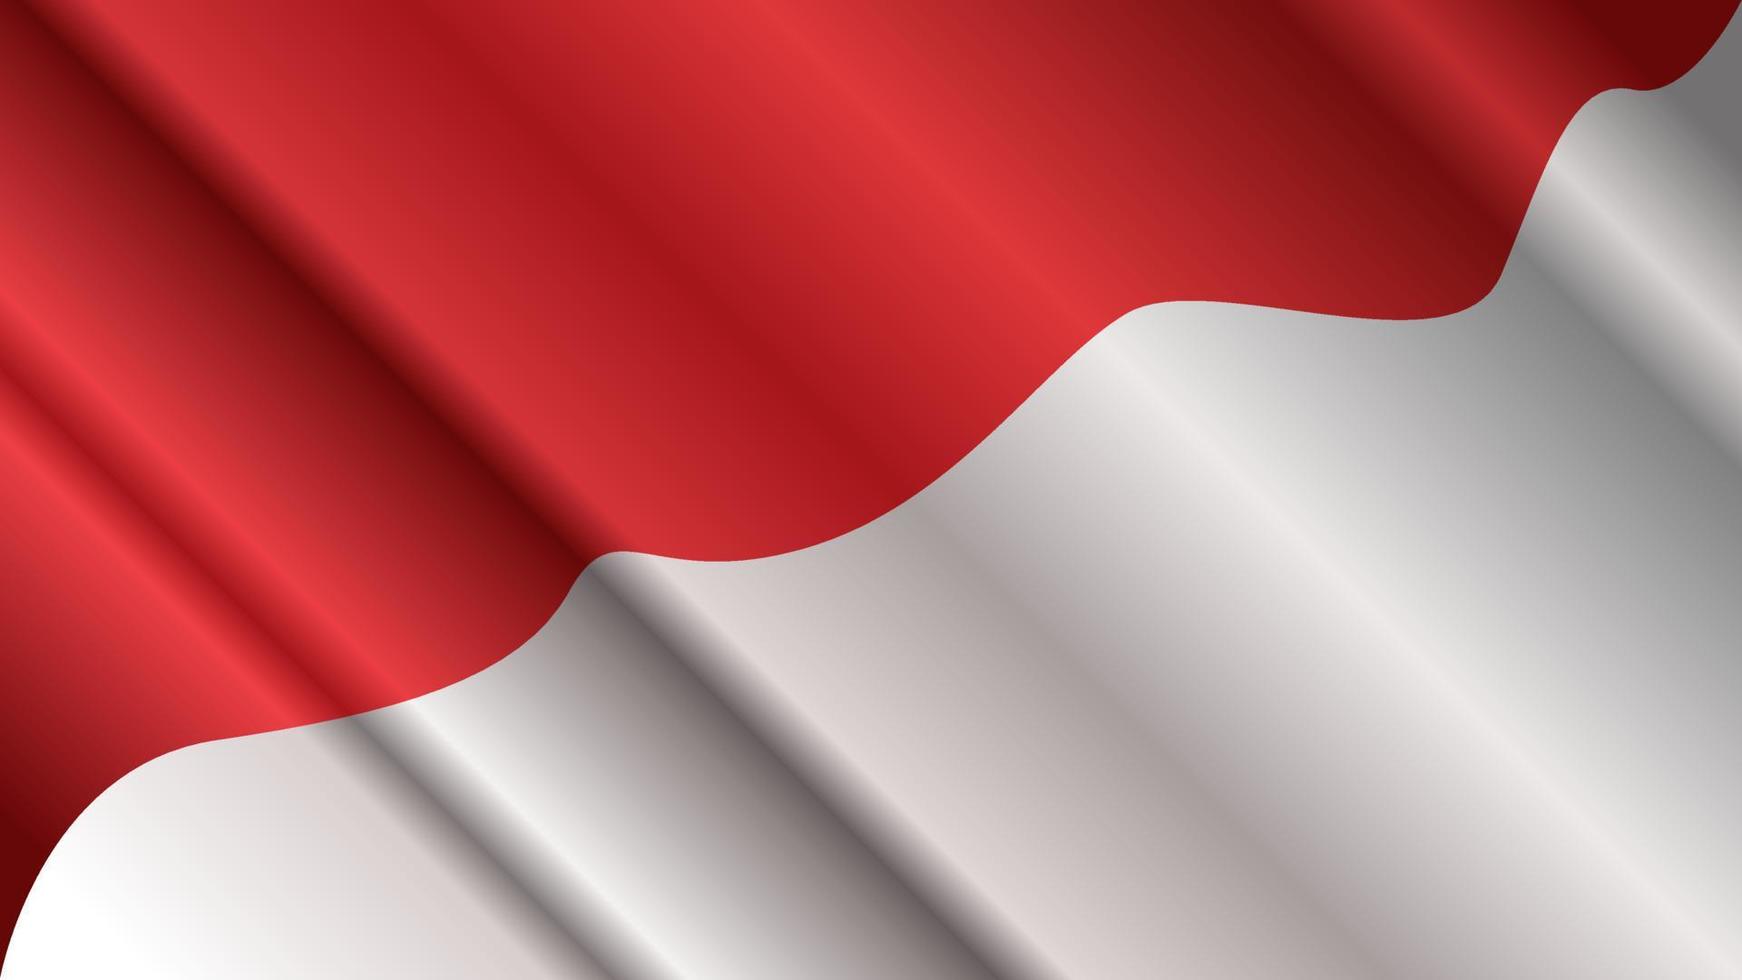 Red white realistic Indonesia flag wave bakground design vector